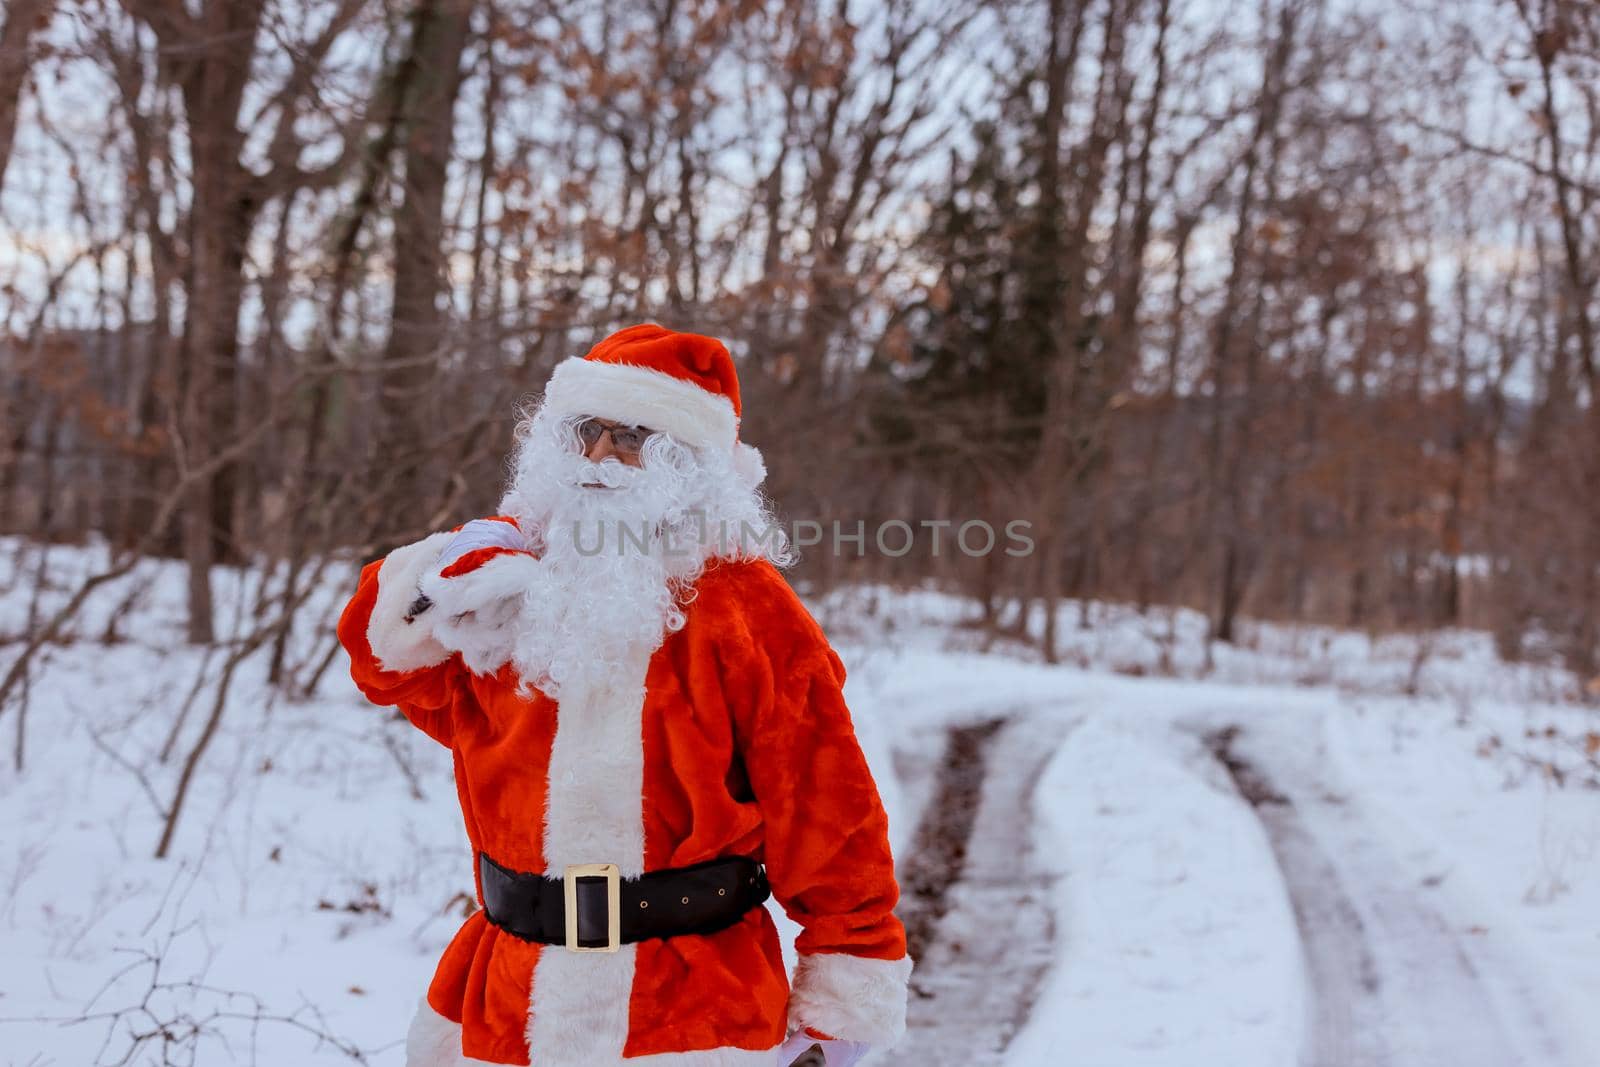 Santa Claus in the winter forest the carrying Merry Christmas present gifts for the new year to children